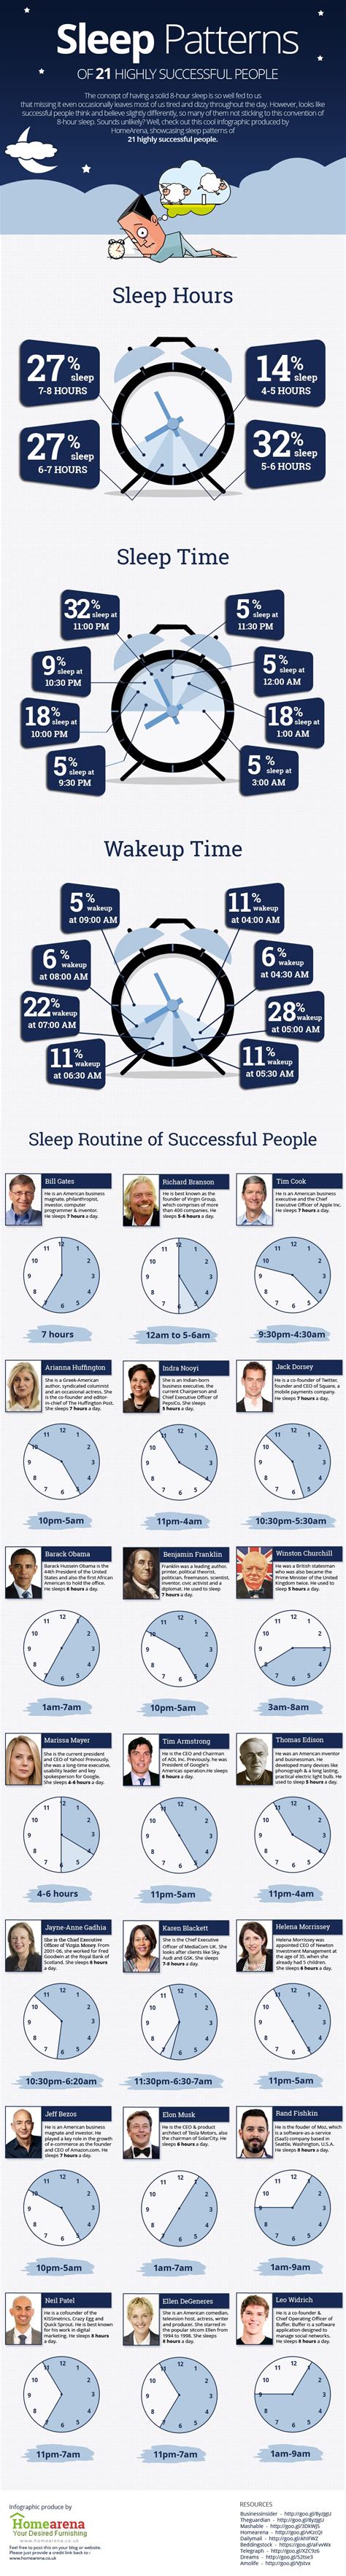 Unusual Sleep Patterns Of 21 Highly Successful People [infographic]